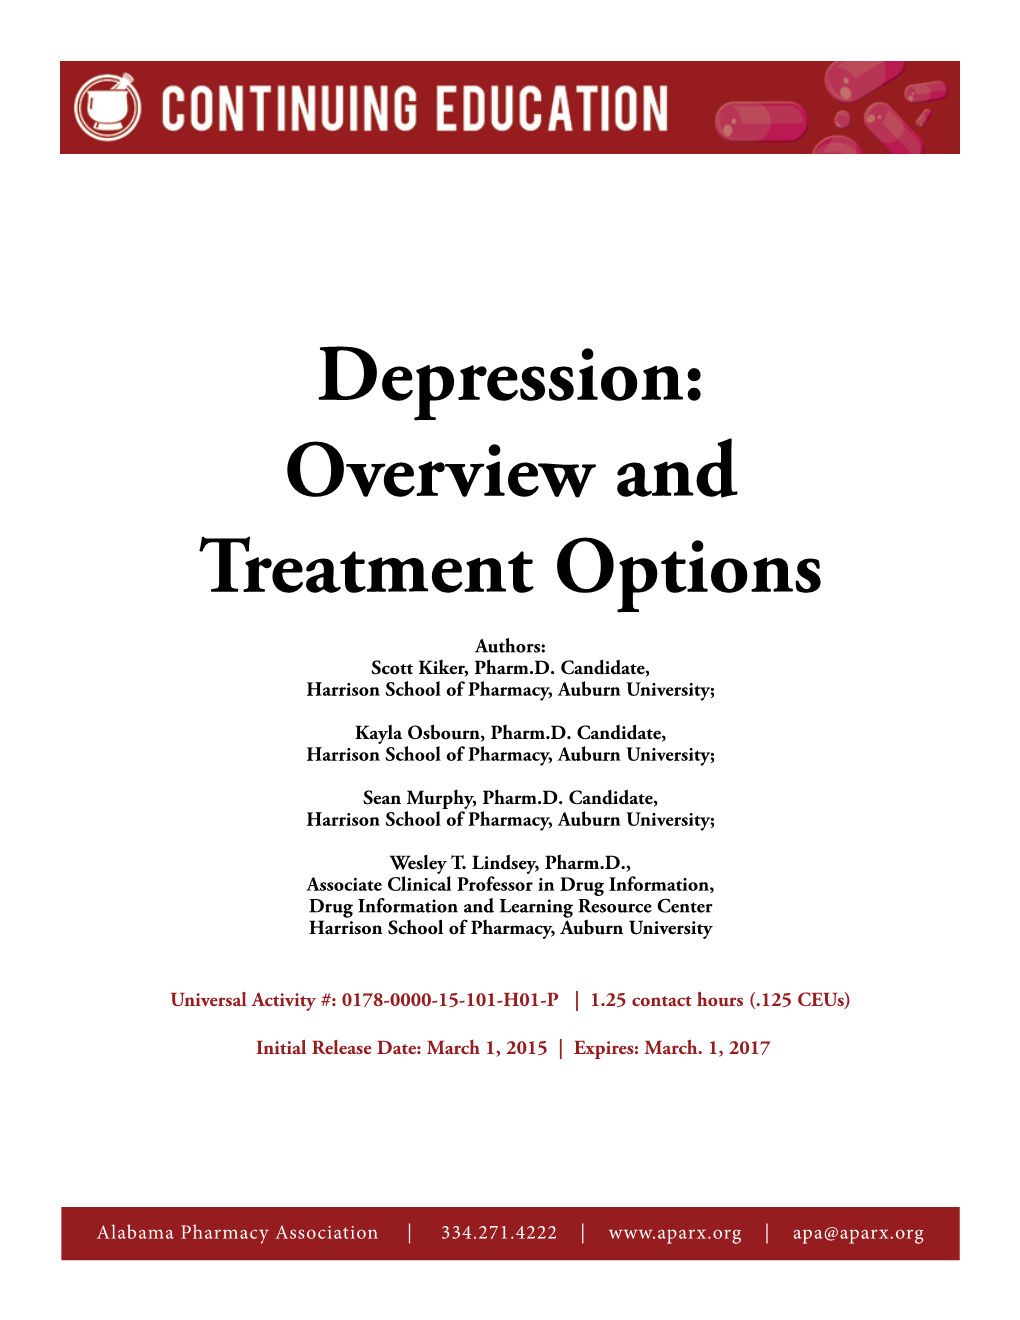 Depression: Overview and Treatment Options